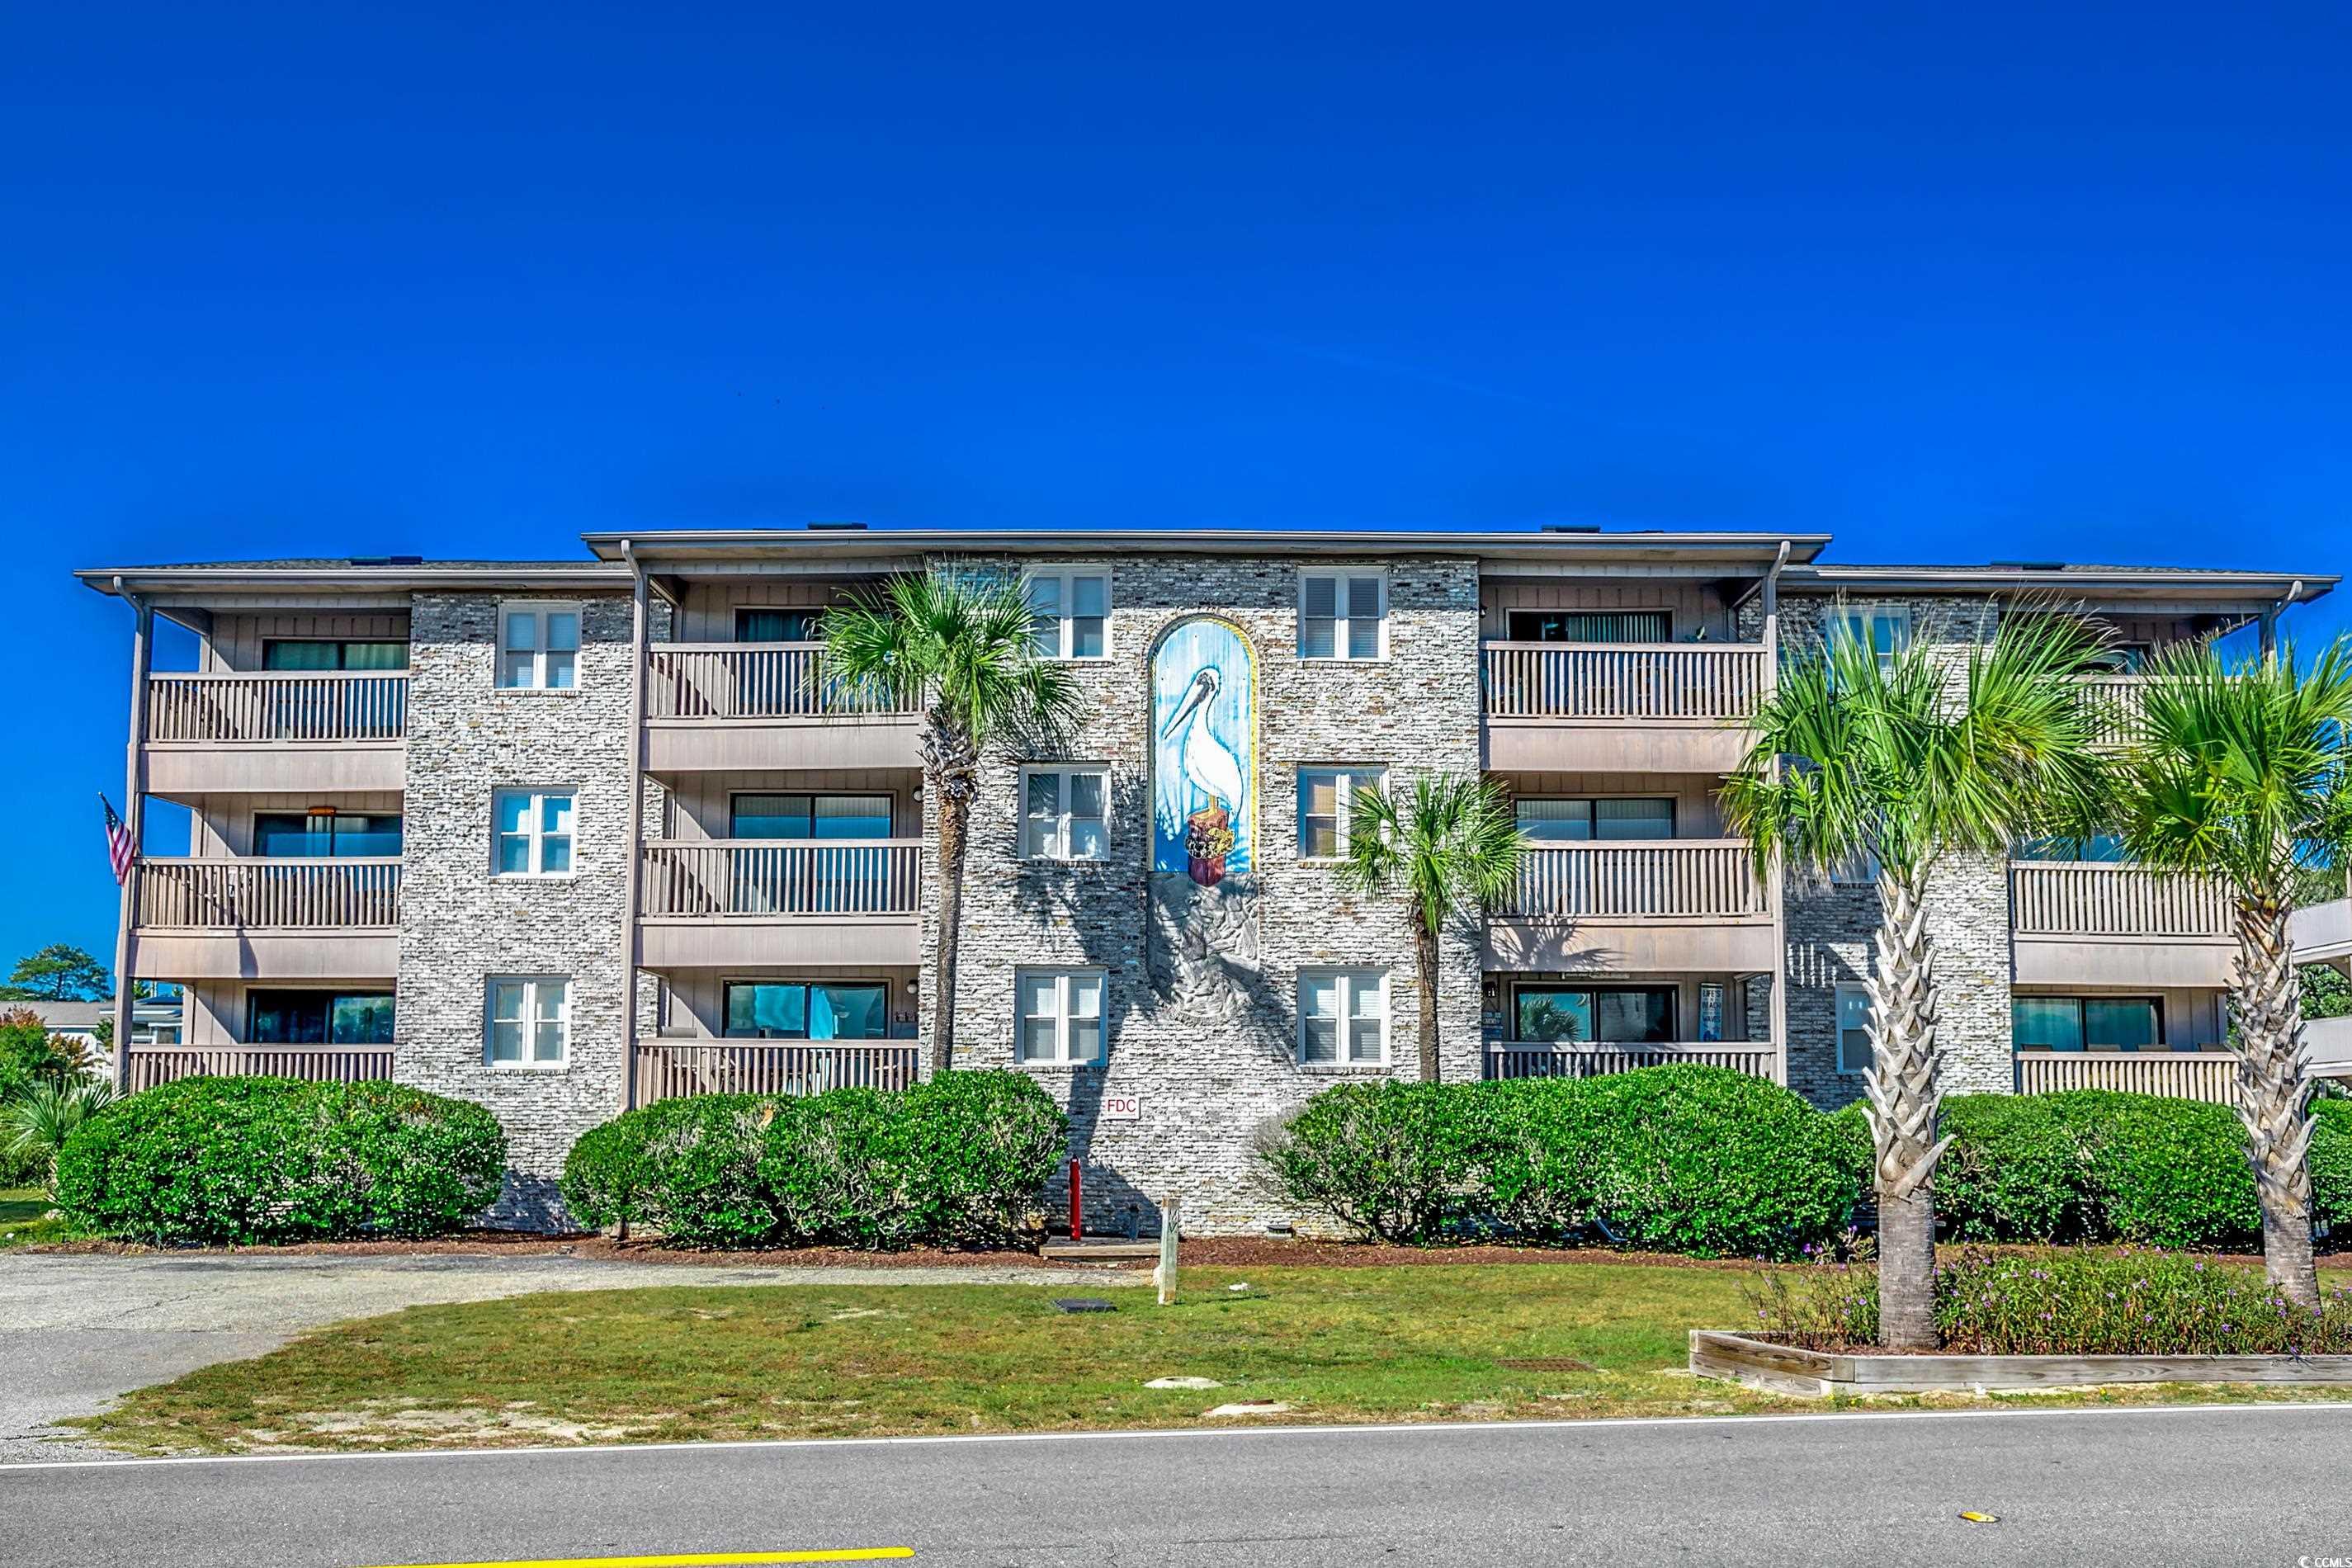 301a pelican pass, located in surfside beach, has expansive ocean views where the tranquil blue ocean meets the sky at the horizon. this fully furnished condo offers the comfort of a home close to the ocean. this 1092-square-foot condo features high cathedral ceilings with a skylight, laminate wood floors, and tile work on the corner-end top floor. it includes two bedrooms and two bathrooms, each room equipped with ceiling fans and a newer hvac system installed in 2022 for improved comfort. the interior boasts an all-white, well-appointed kitchen, a full-size washer and dryer, and a private balcony accessible from the living room and master bedroom, offering fantastic ocean views. within the well-maintained complex of pelican pass, residents have access to a large community pool and are situated approximately 480 feet from public beach access. strategically placed half a mile south of surfside pier and close to a vibrant restaurant district, the location is convenient for accessing local amenities such as libraries, parks, sports courts, grocery stores, and a seasonal farmer's market on foot. it's also within a comfortable distance to attractions such as barefoot landing, broadway at the beach, myrtle beach state park, the myrtle beach boardwalk, and skywheel, with the myrtle beach international airport only a 15-minute drive away. this property is ideal for those looking for a seasonal getaway, a profitable rental opportunity, or a permanent residence. marketed as a turn-key property, it promises a quintessential beachside experience. prospective buyers can take a matterport 3d virtual tour at www.bit.ly/301apelicanpass. 301a pelican pass encapsulates beach living with its stunning views and excellent location, offering an opportunity to own a piece of paradise.